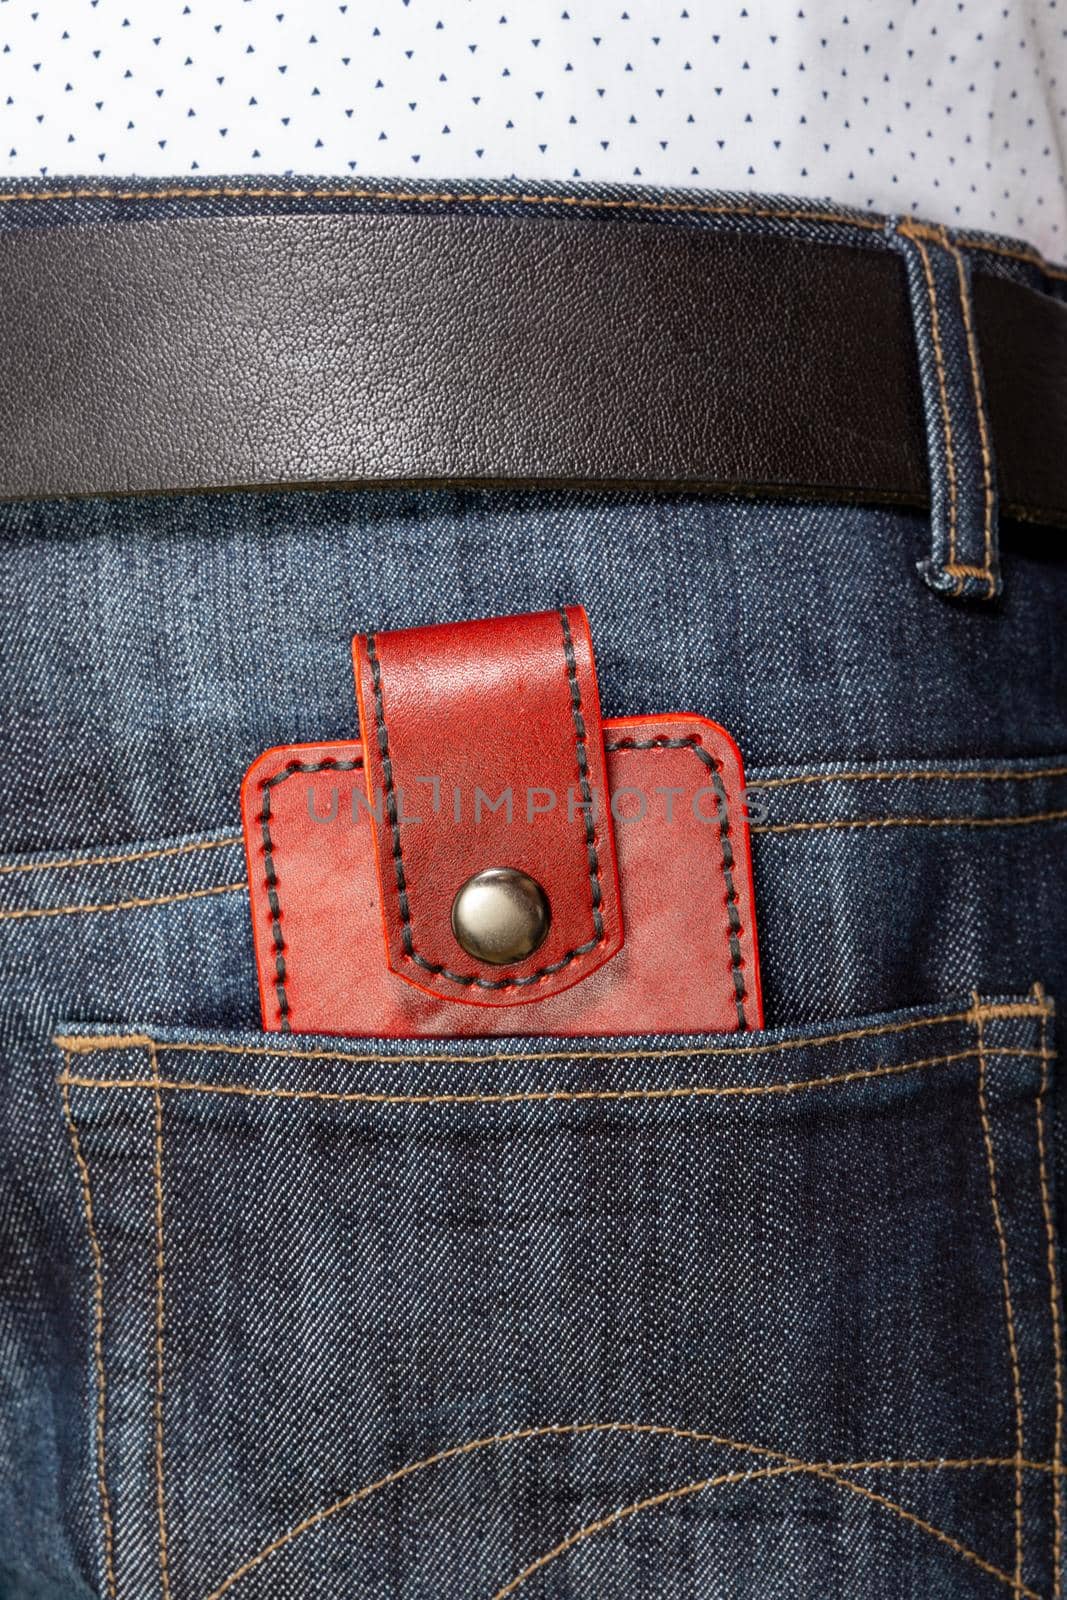 Luxury craft business card holder case made of leather. Red Leather box for cards in the back pocket of jeans.